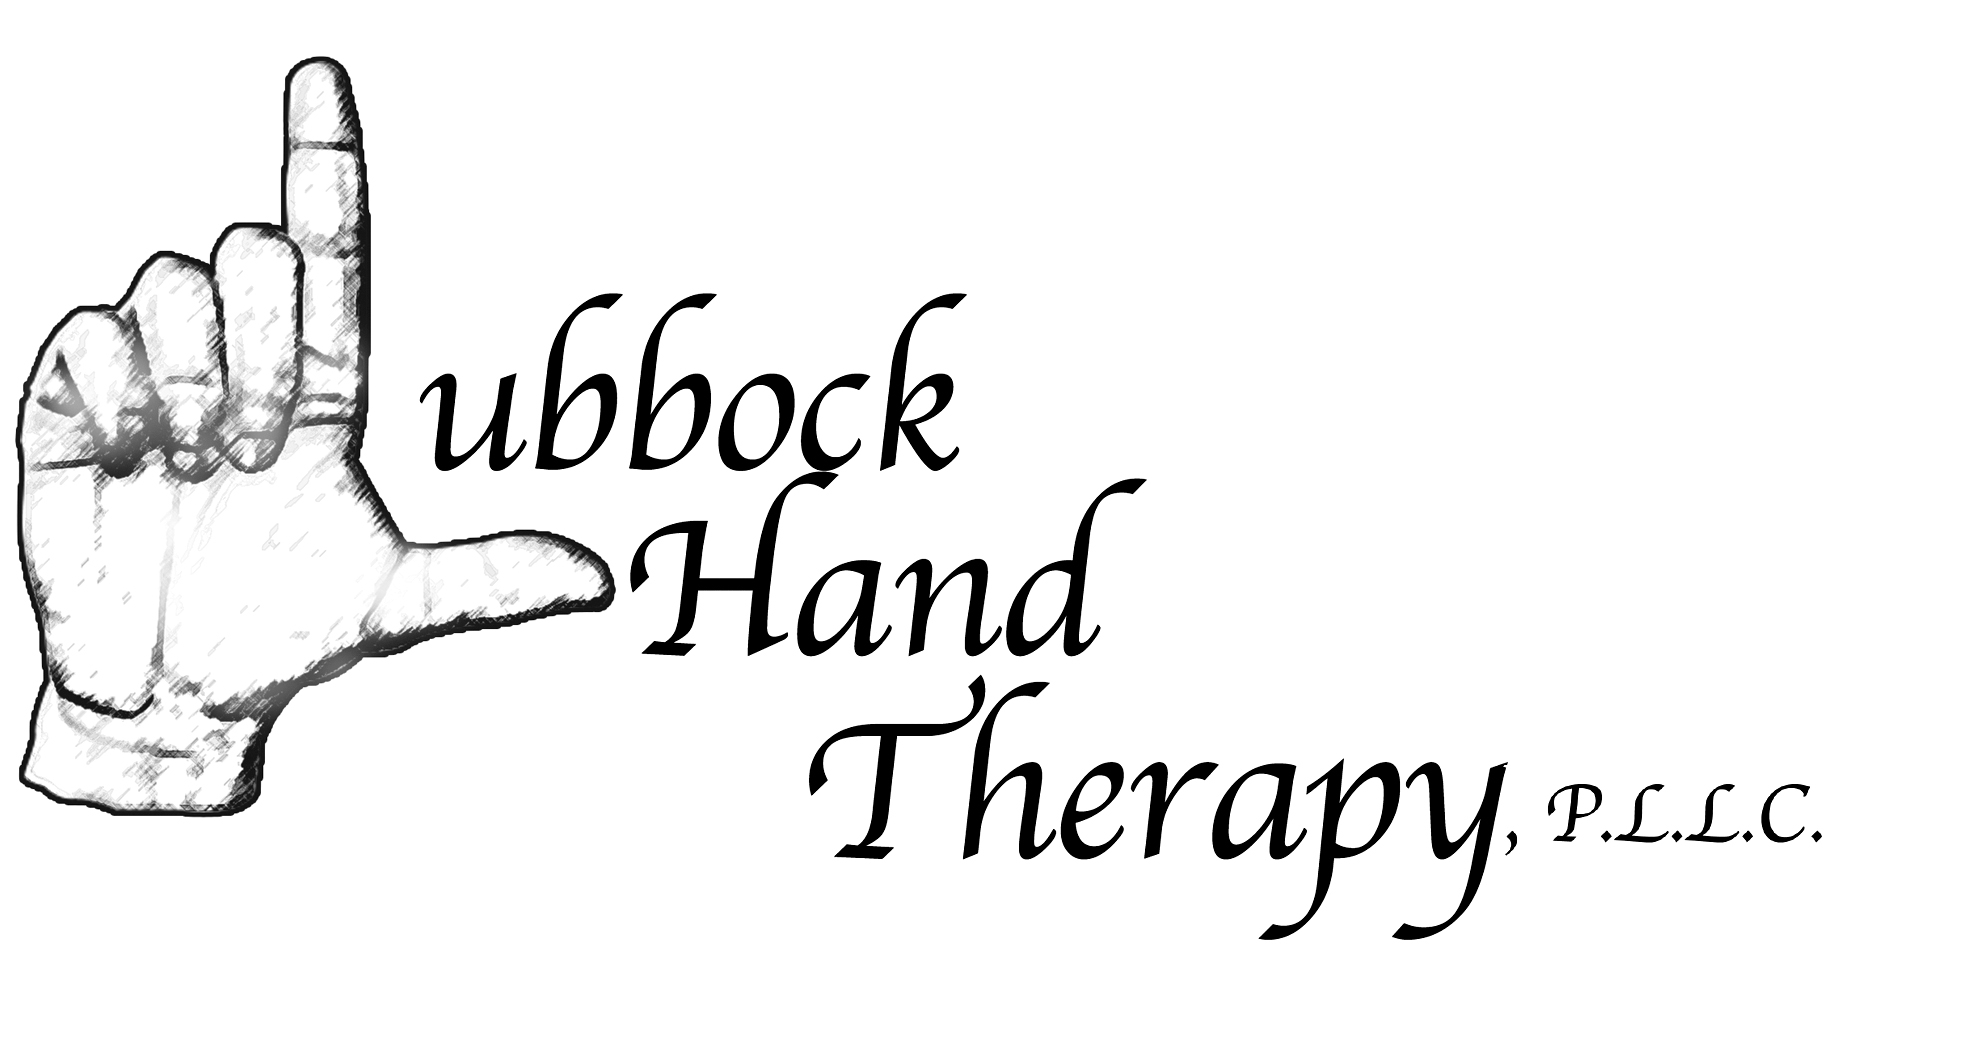 Lubbock Hand Therapy